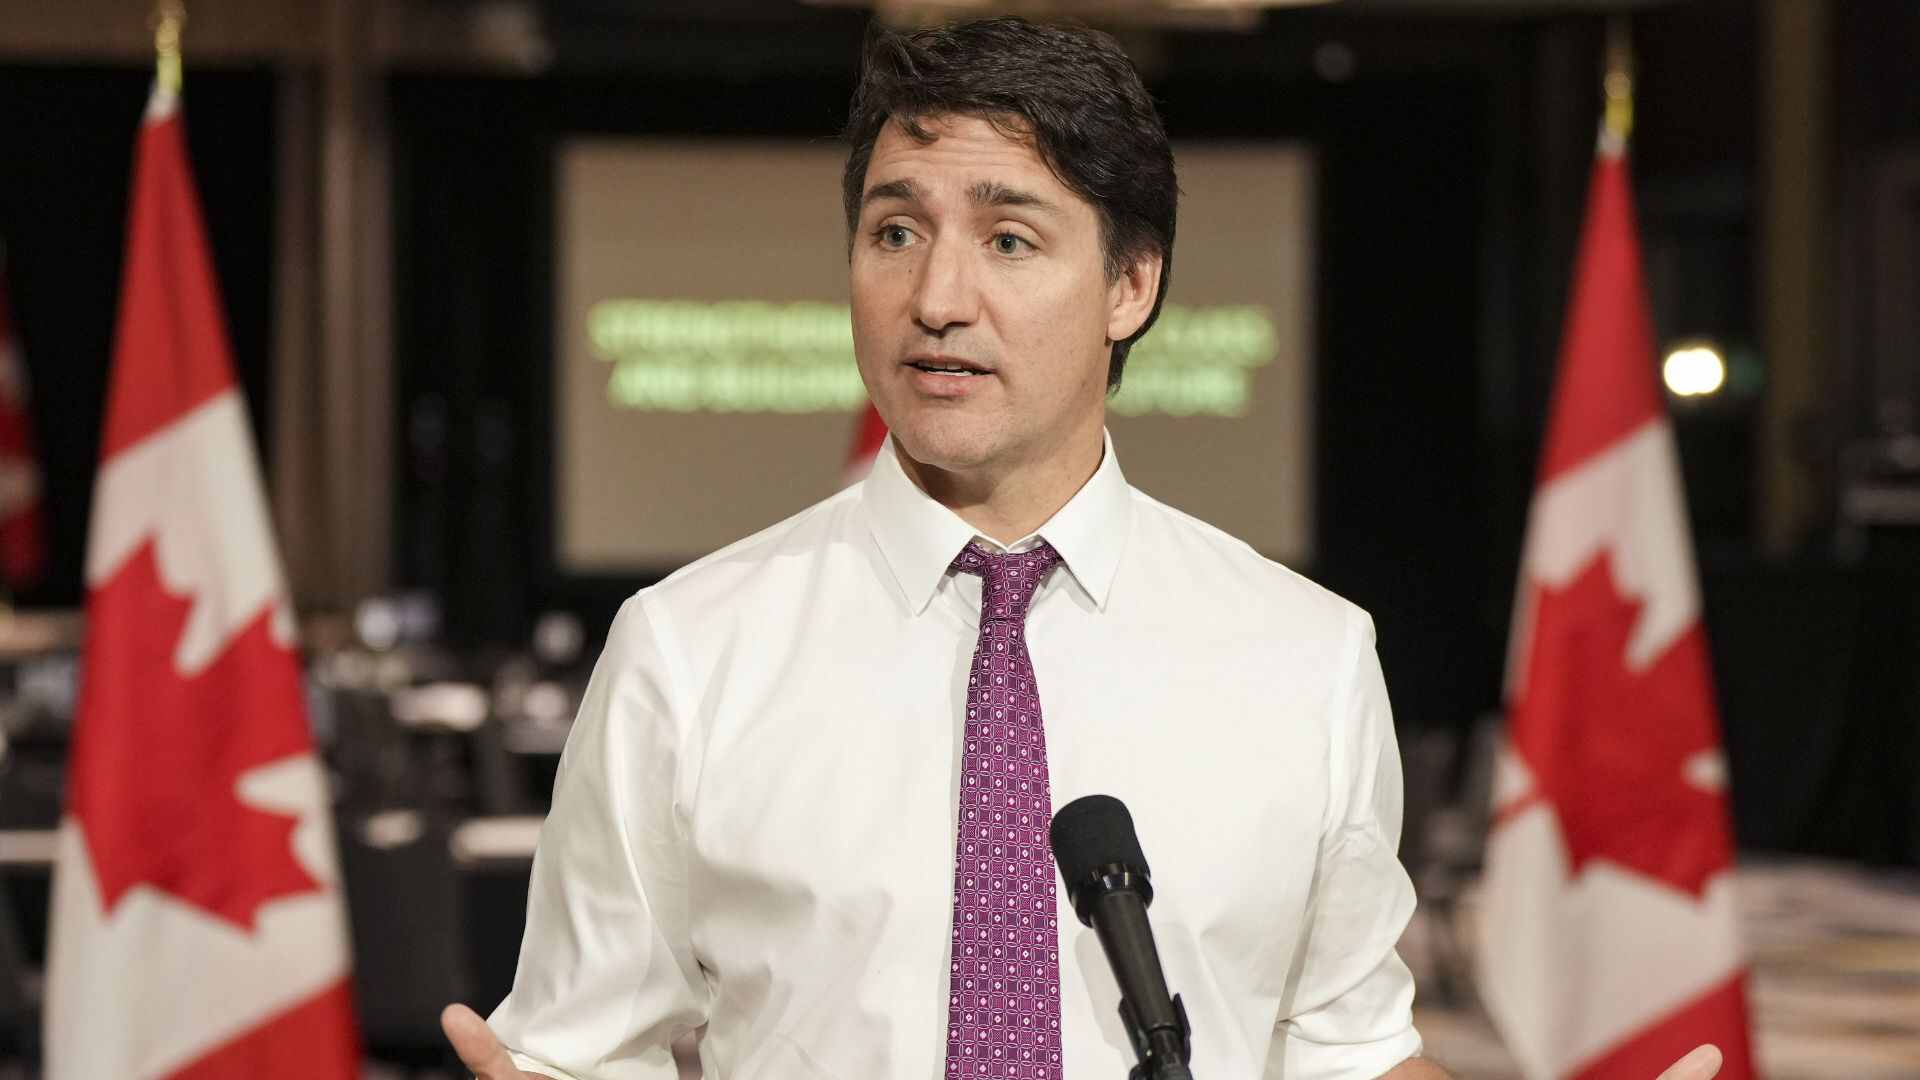 Liberal MP Calls For Trudeau’s Resignation After By-Election Defeat